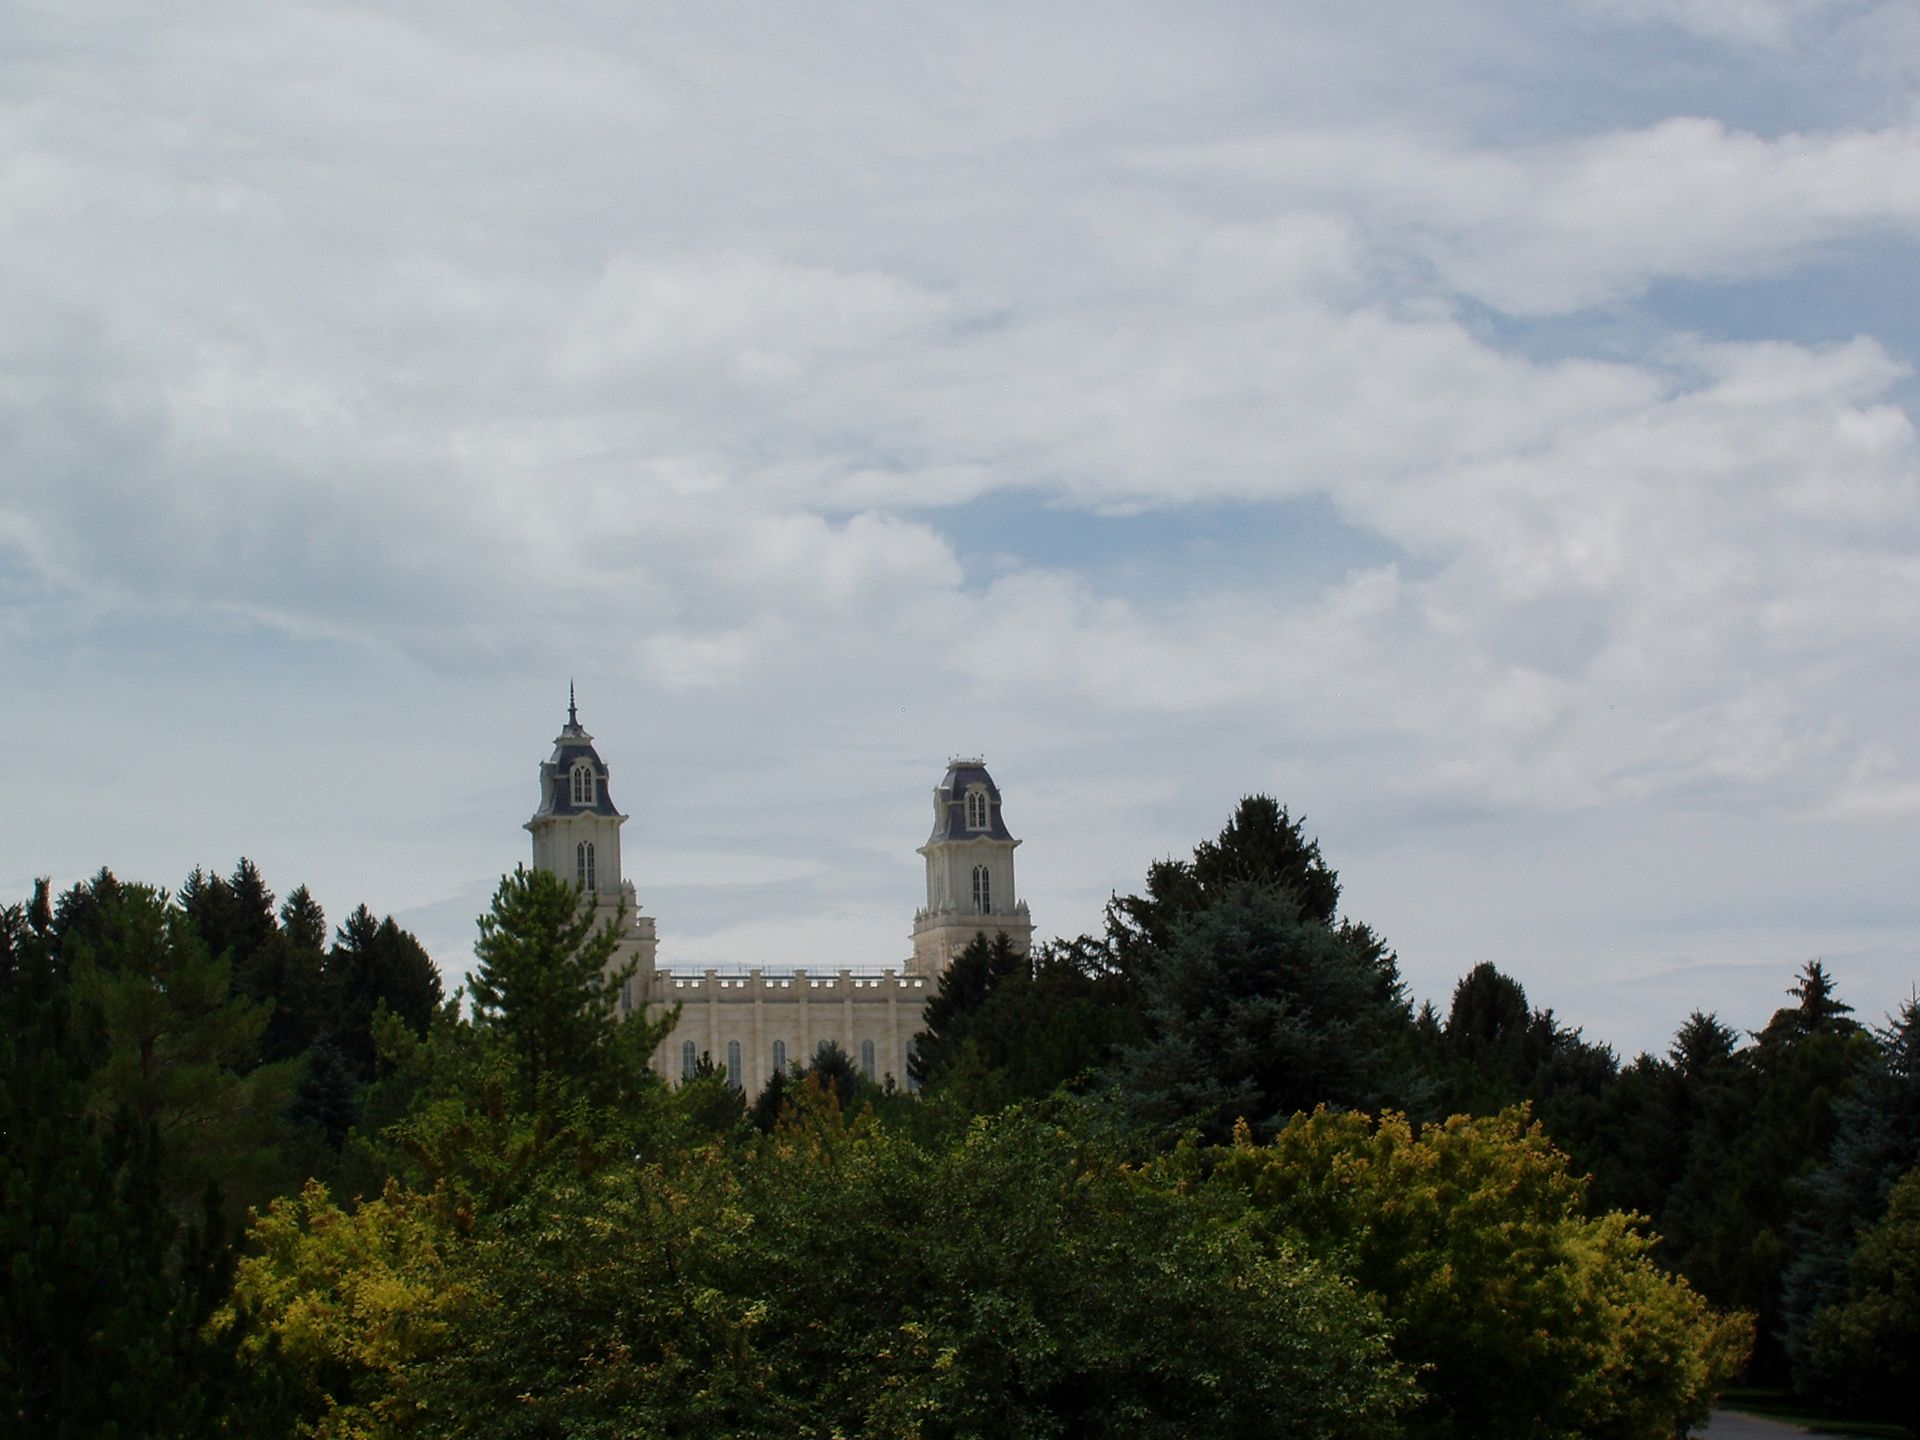 The Manti Utah Temple scenery, including the spires.